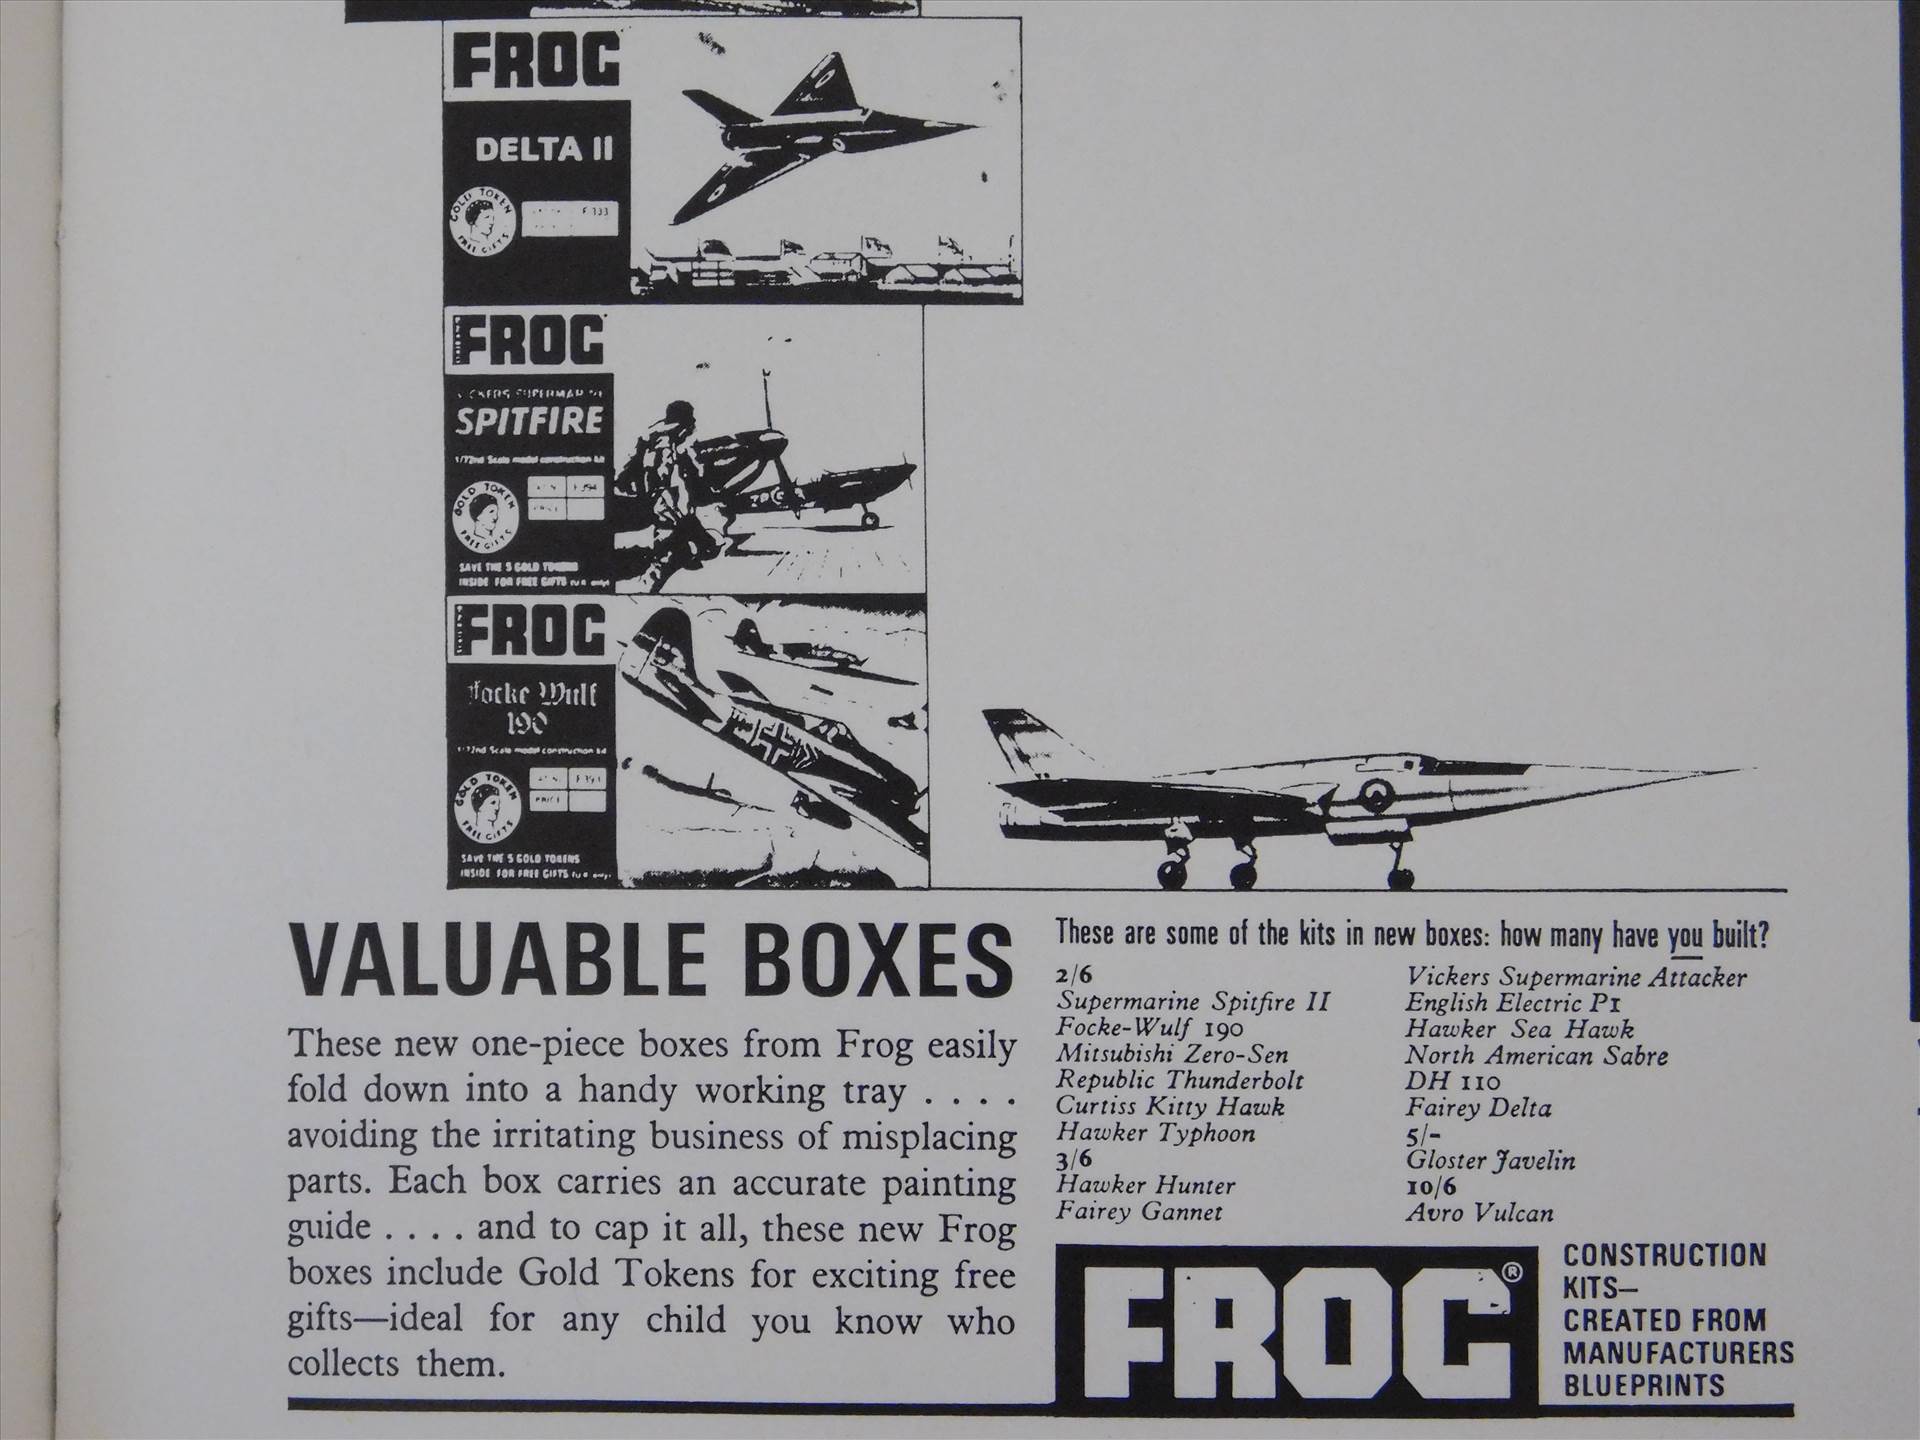 FROGadverts 005.JPG  by adey m